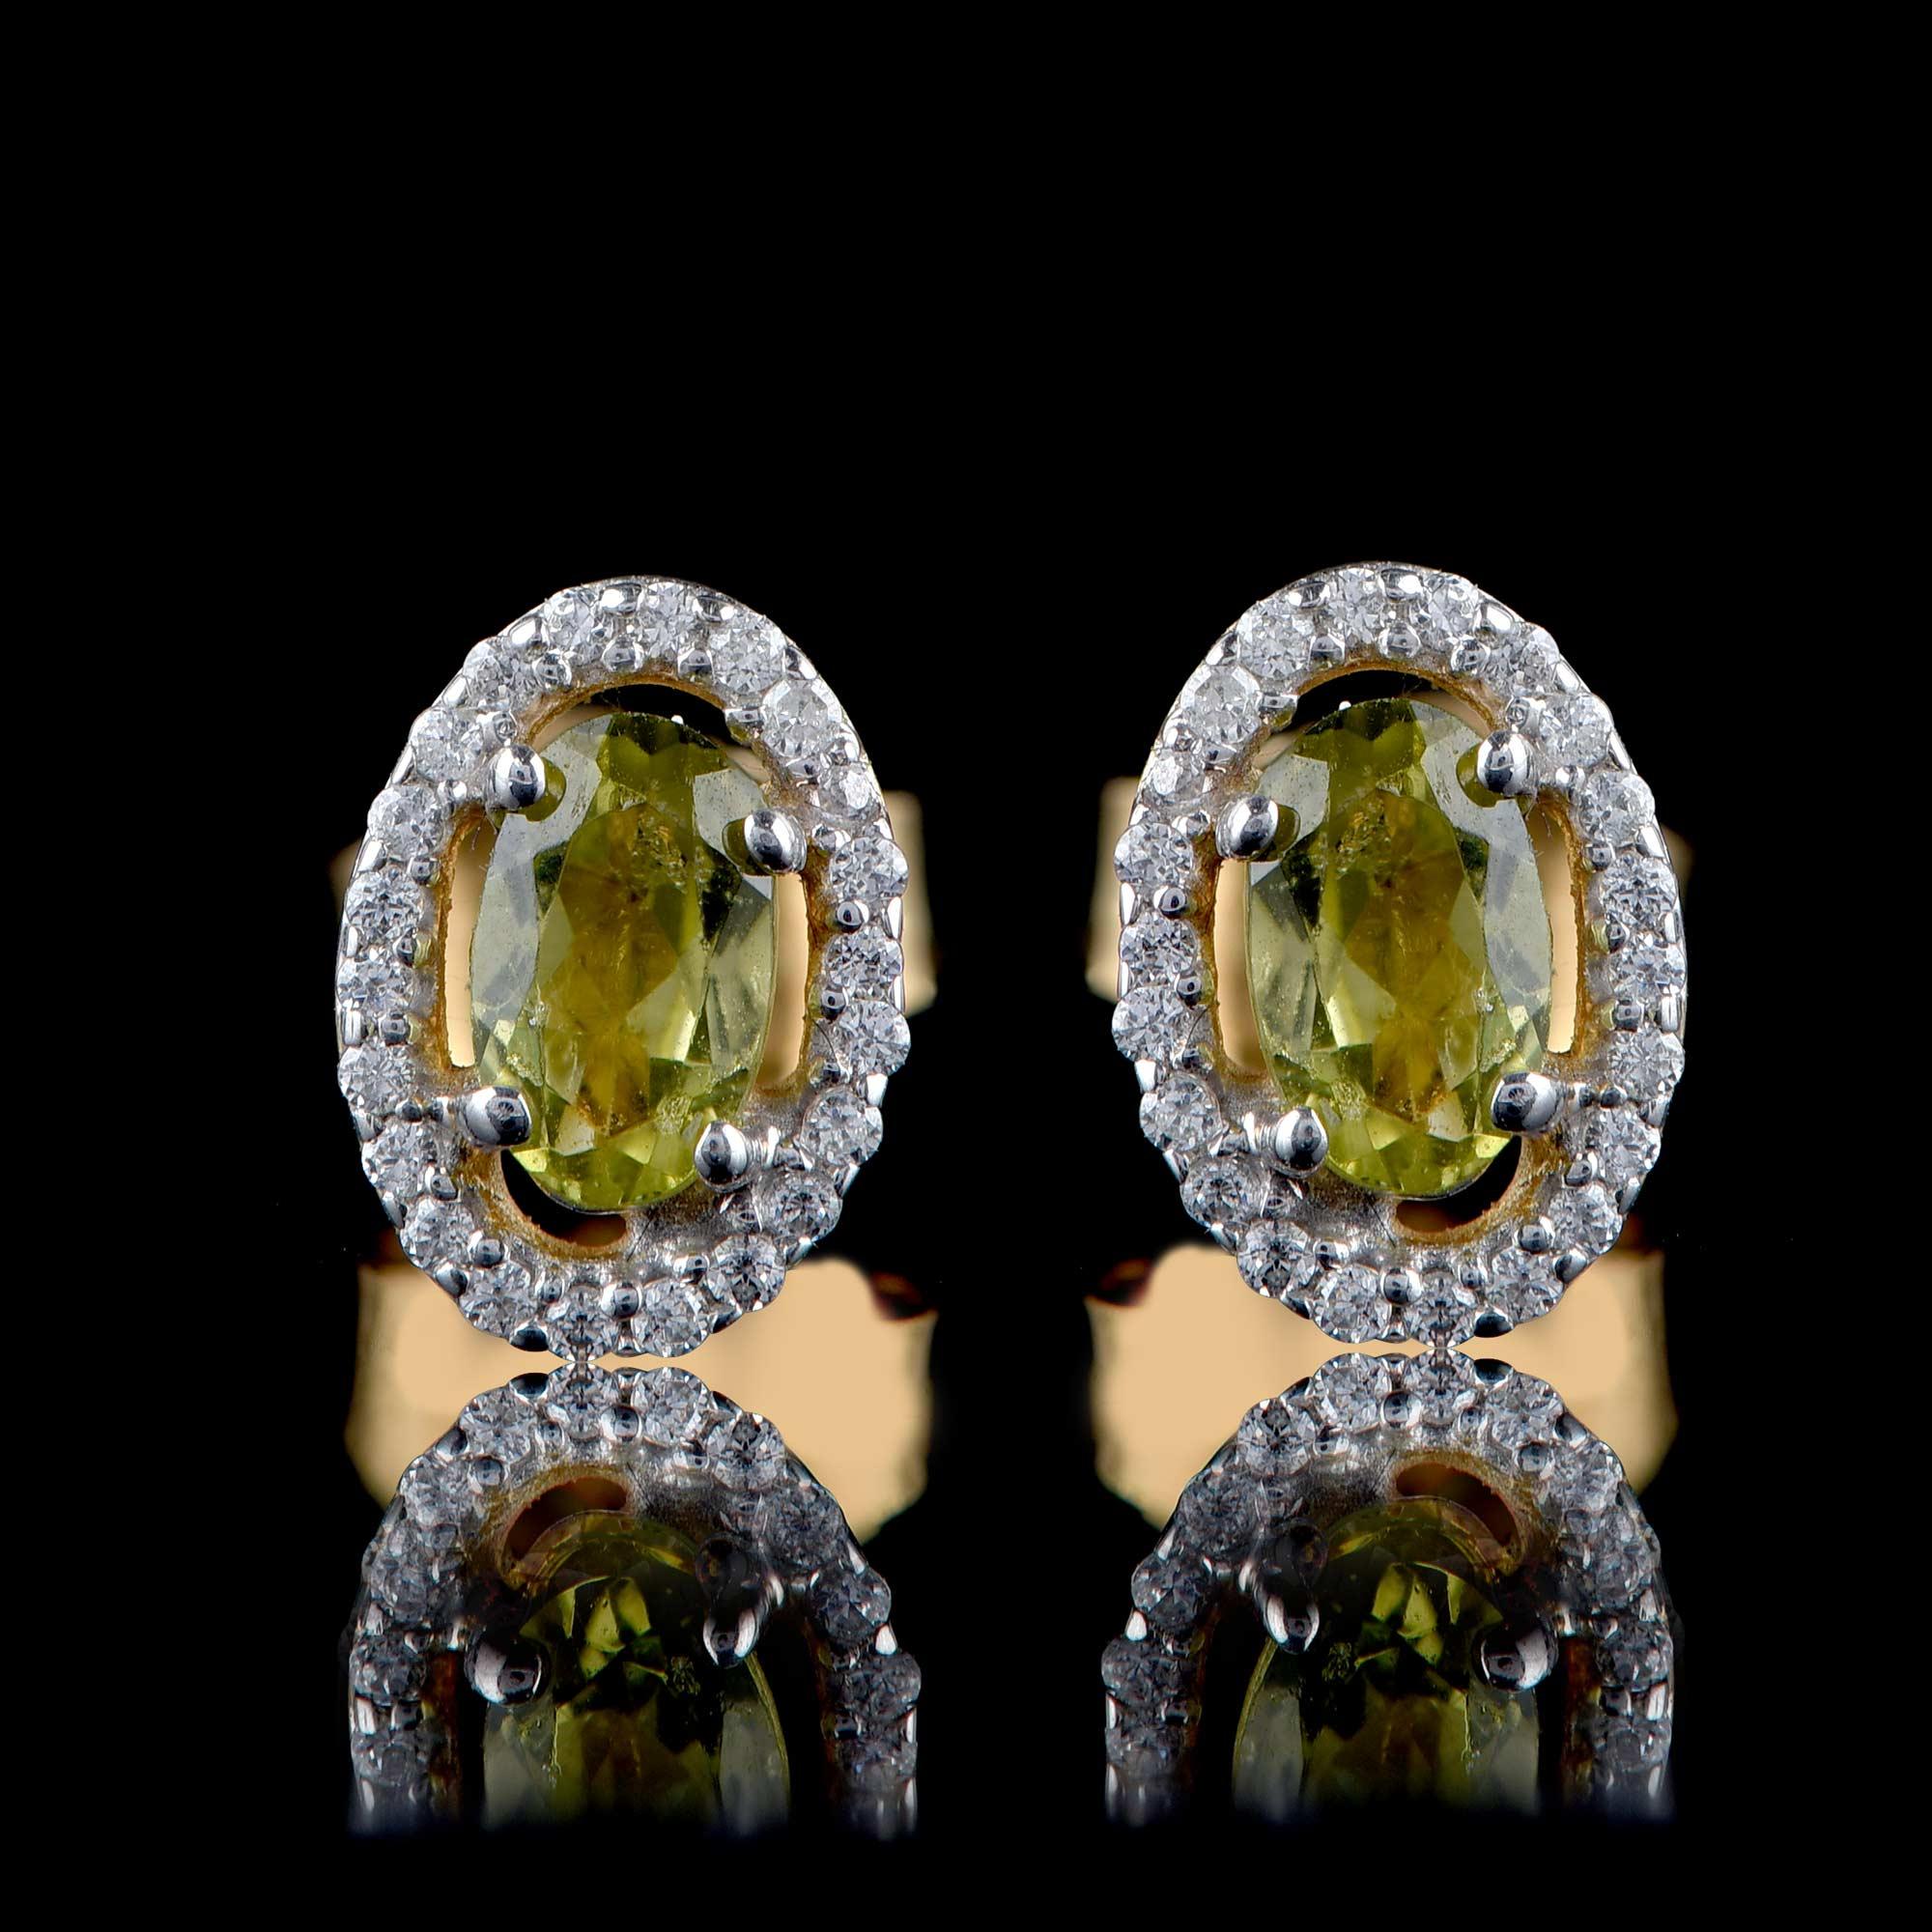 Hand-crafted elegantly in 18-karat yellow gold and embellished beautifully with 44 brilliant diamonds and 2 oval shaped peridot in prong setting. The diamonds are graded H-I Color, I2 Clarity.